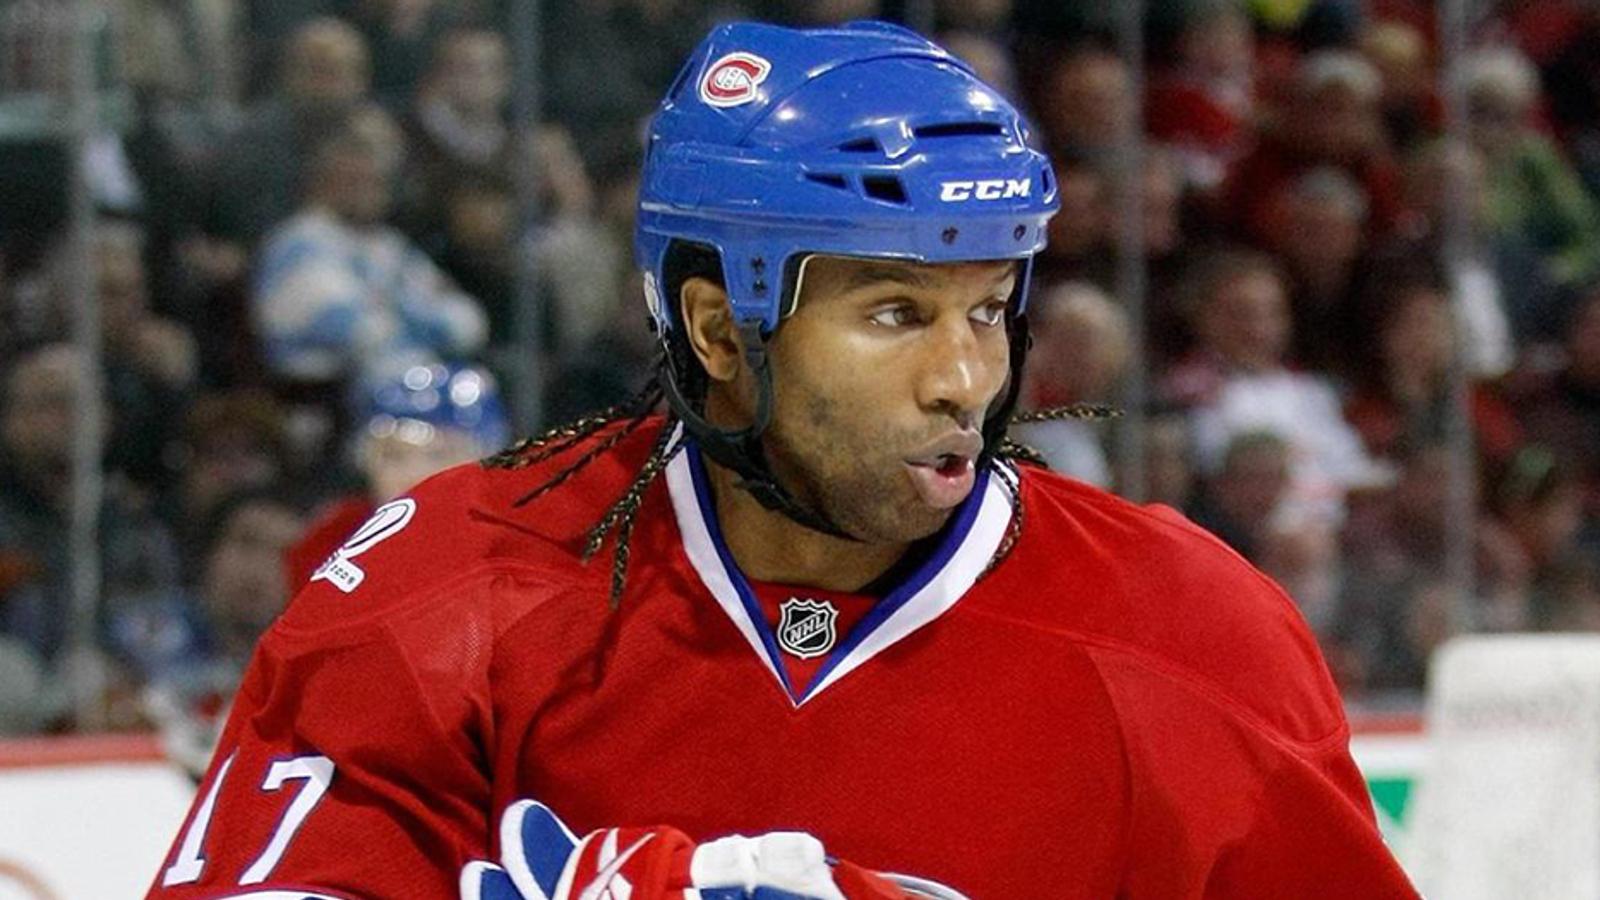 Georges Laraque says Jesperi Kotkaniemi's Hurricanes offer sheet is a blessing